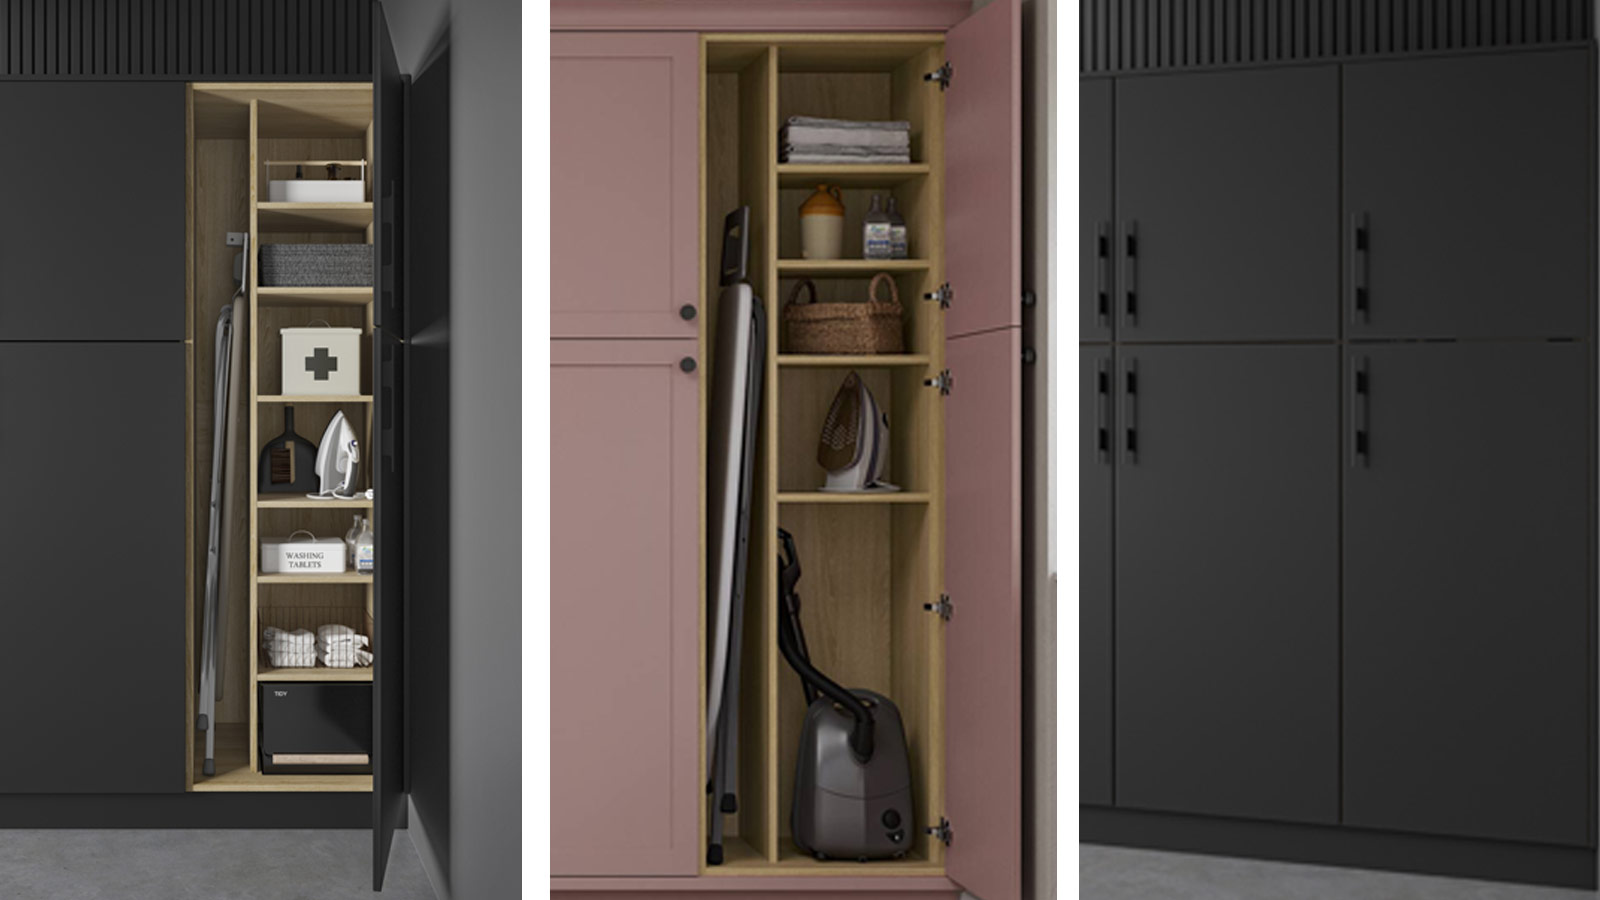 Dark and light laundry room utility closets with natural wood-effect dividers